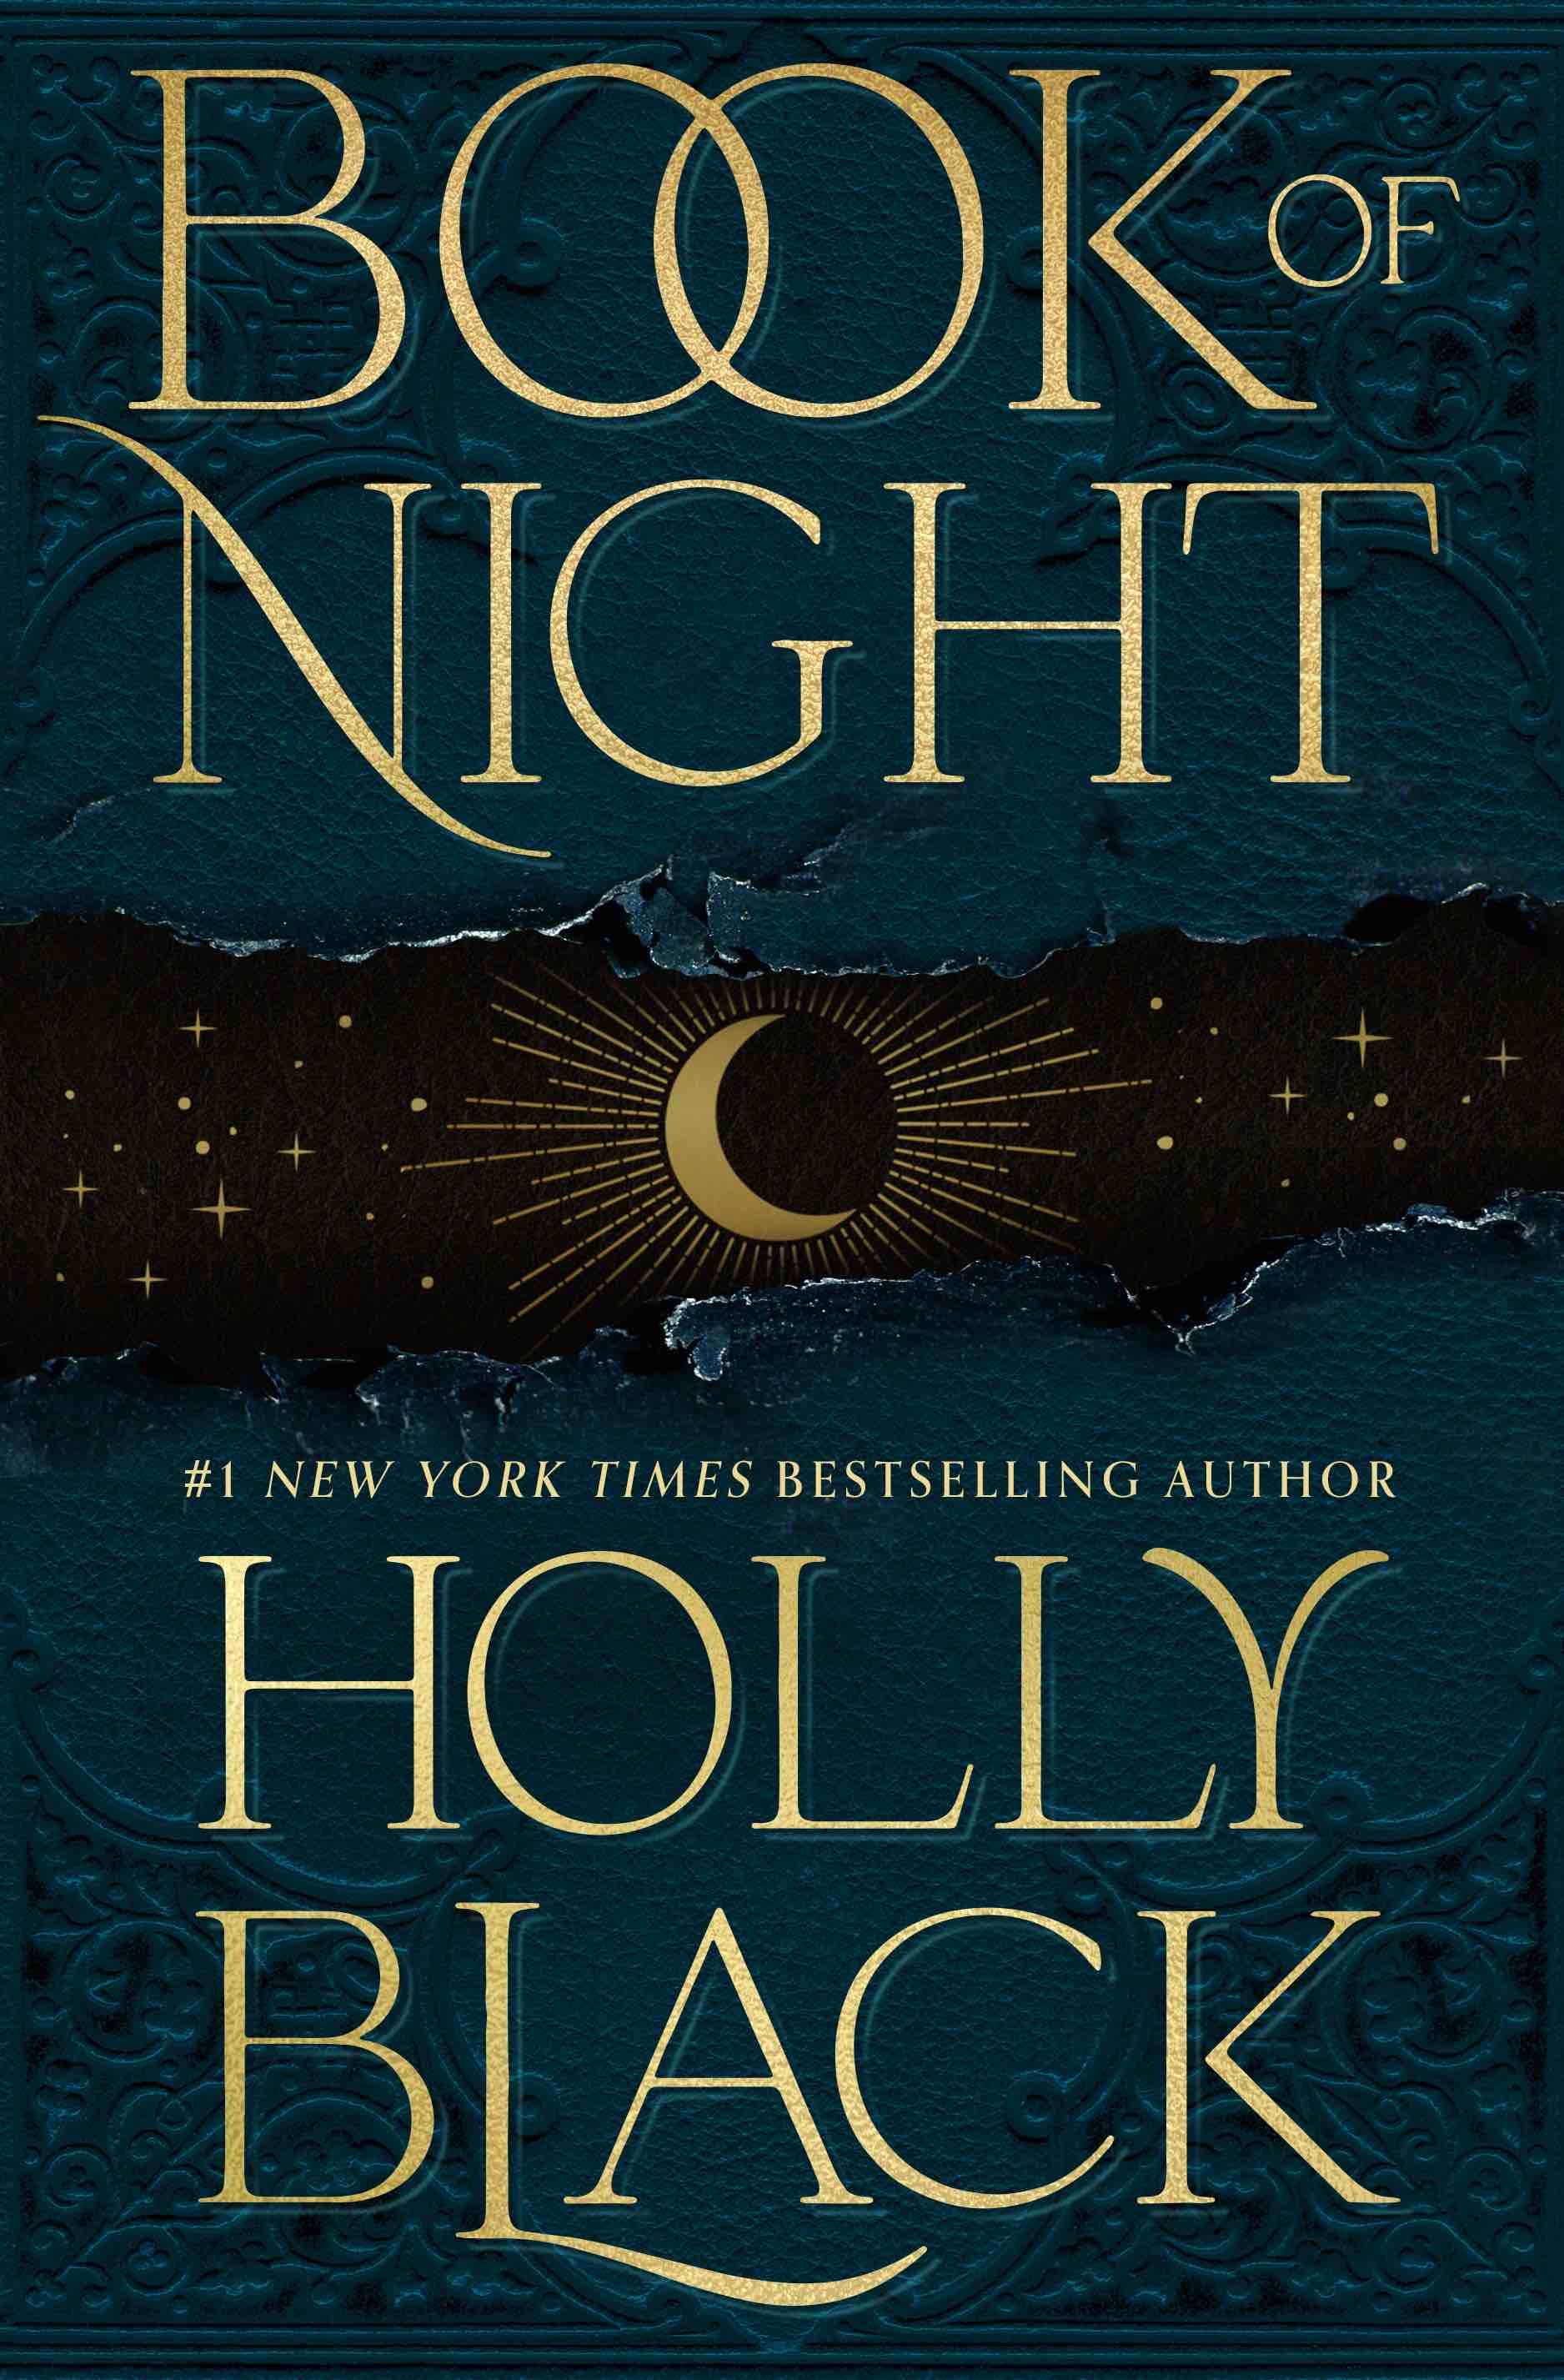 In-Person Event with Holly Black/Book of Night